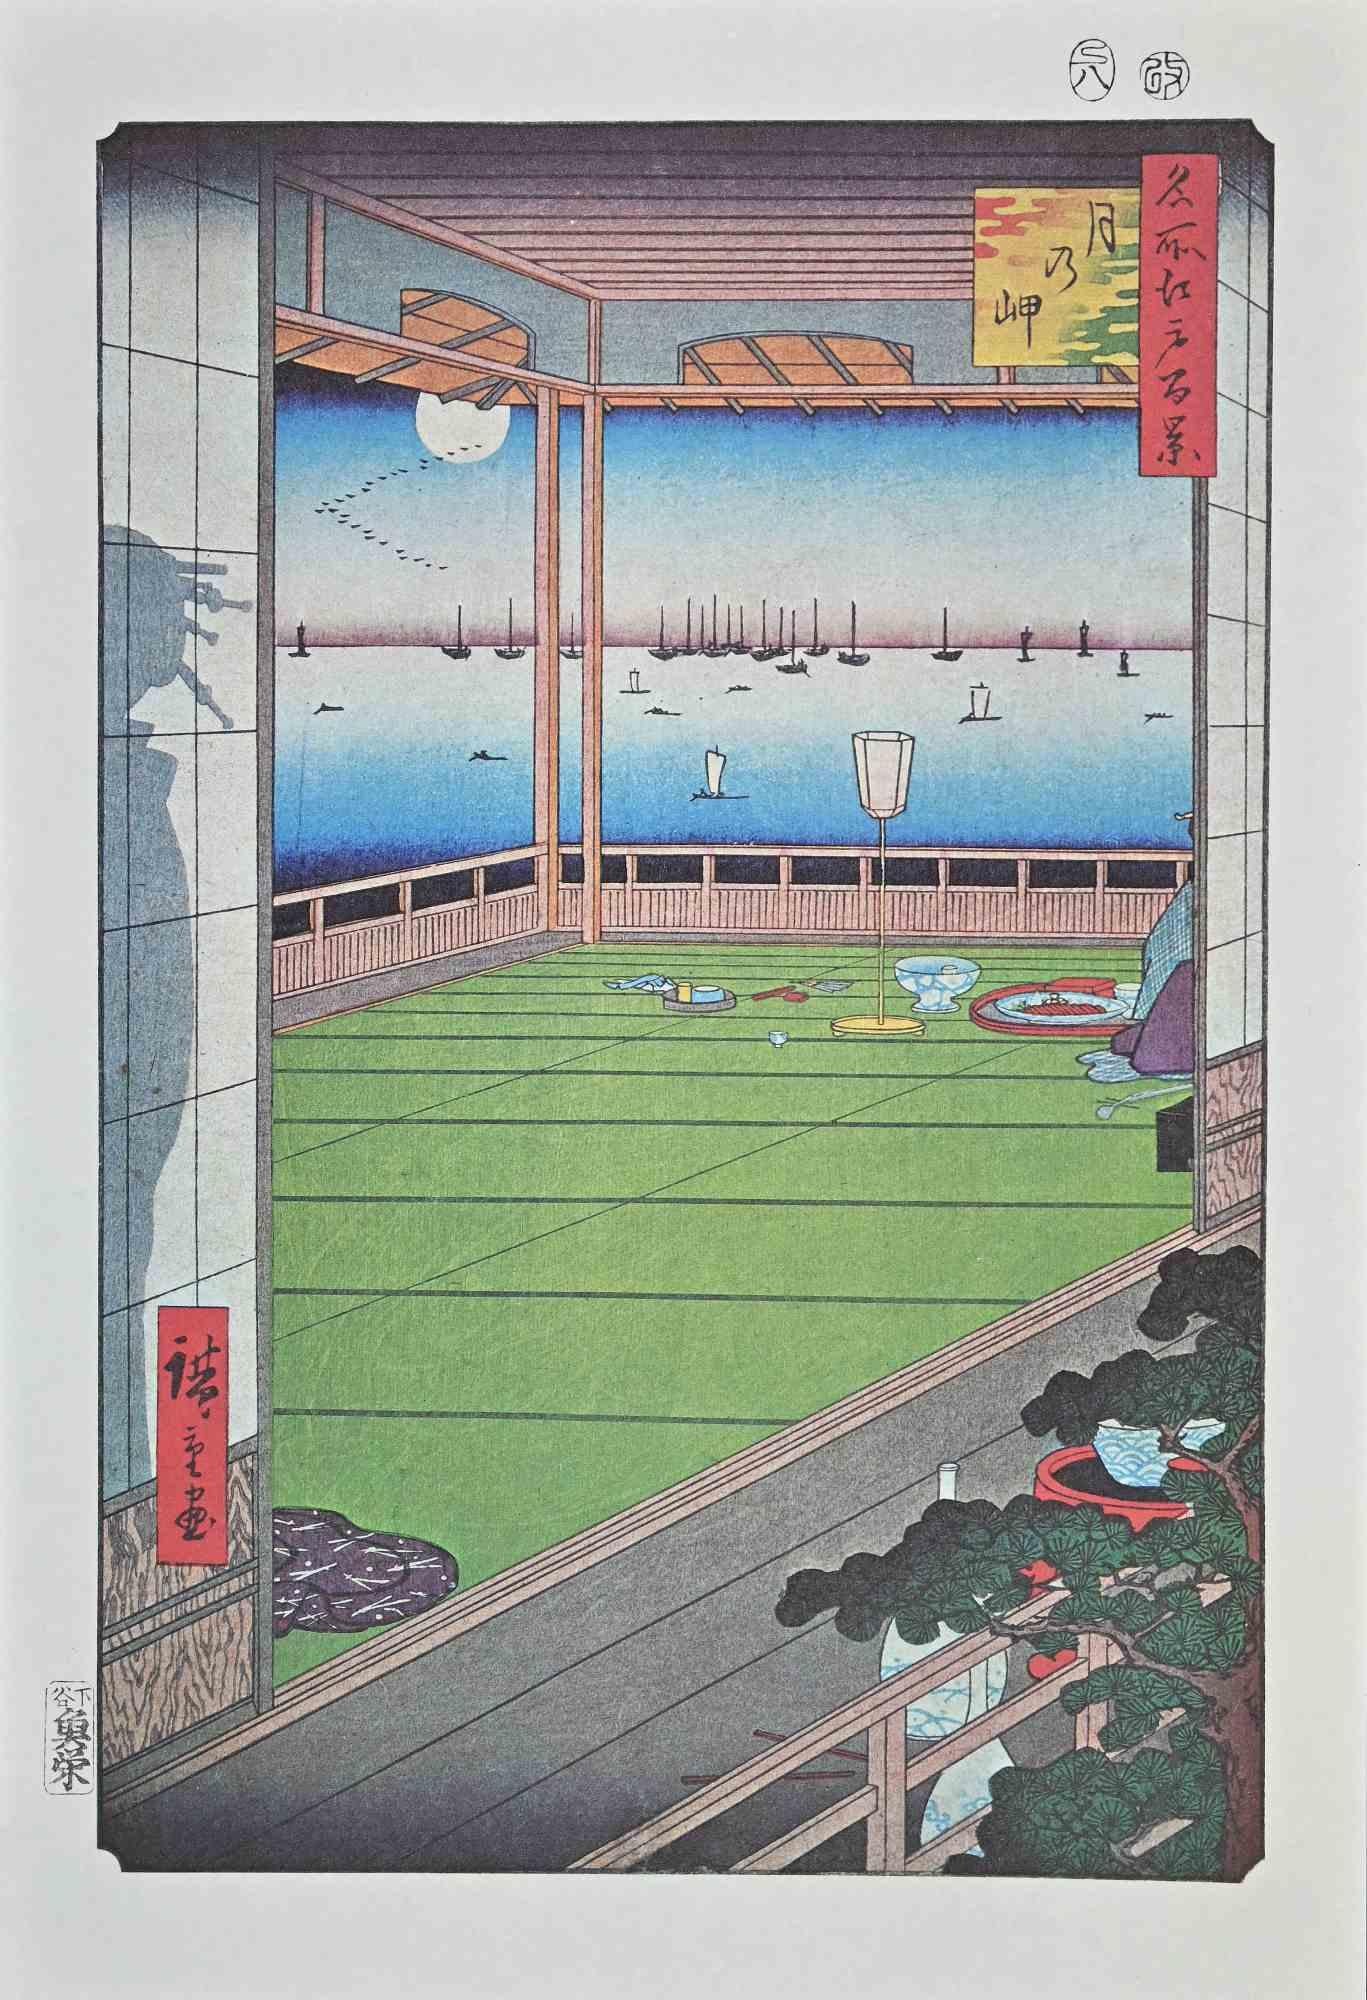 Tea Room is a modern artwork realized in the Mid-20th Century.

Mixed colored lithograph after a woodcut realized by the great Japanese artist Utagawa Hiroshige in the 19th century.

Very Good conditions.

Utagawa Hiroshige, also known as  Hiroshige